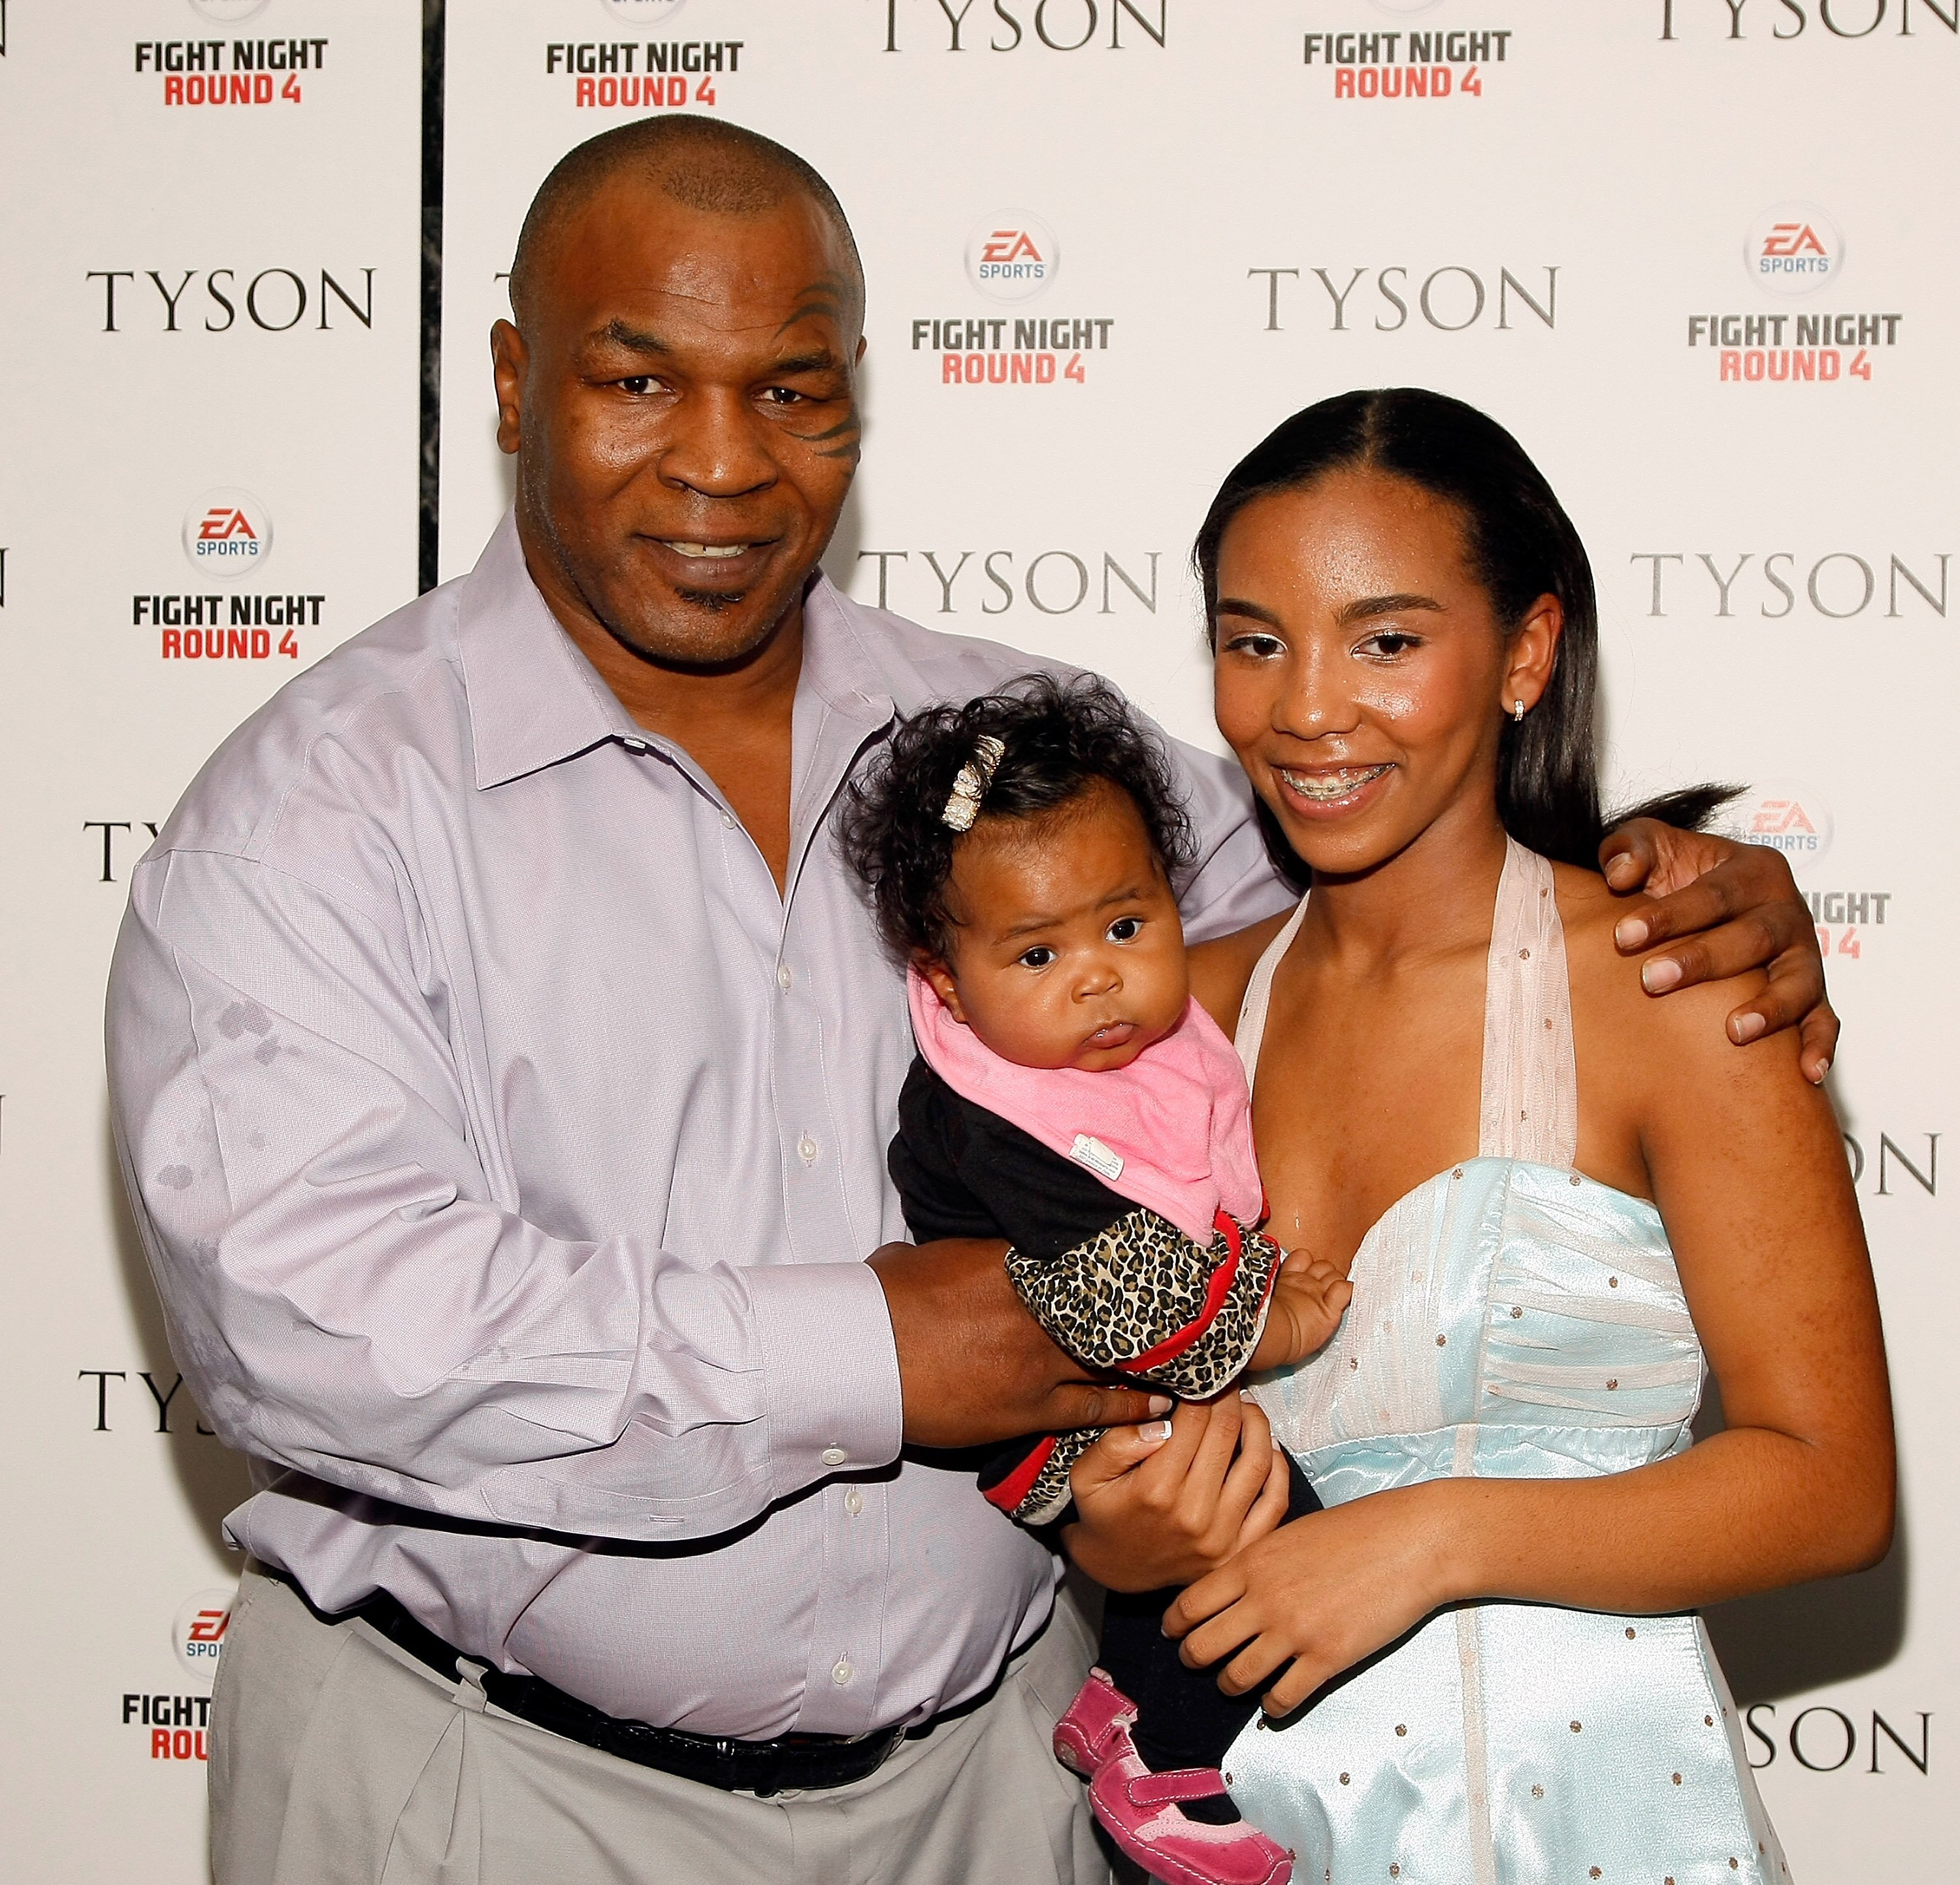 Mike Tyson, Ramsey and his youngest daughter attend a screening of "Tyson" at the AMC Loews 19th Street on April 20, 2009 in New York City. | Source: Getty Images